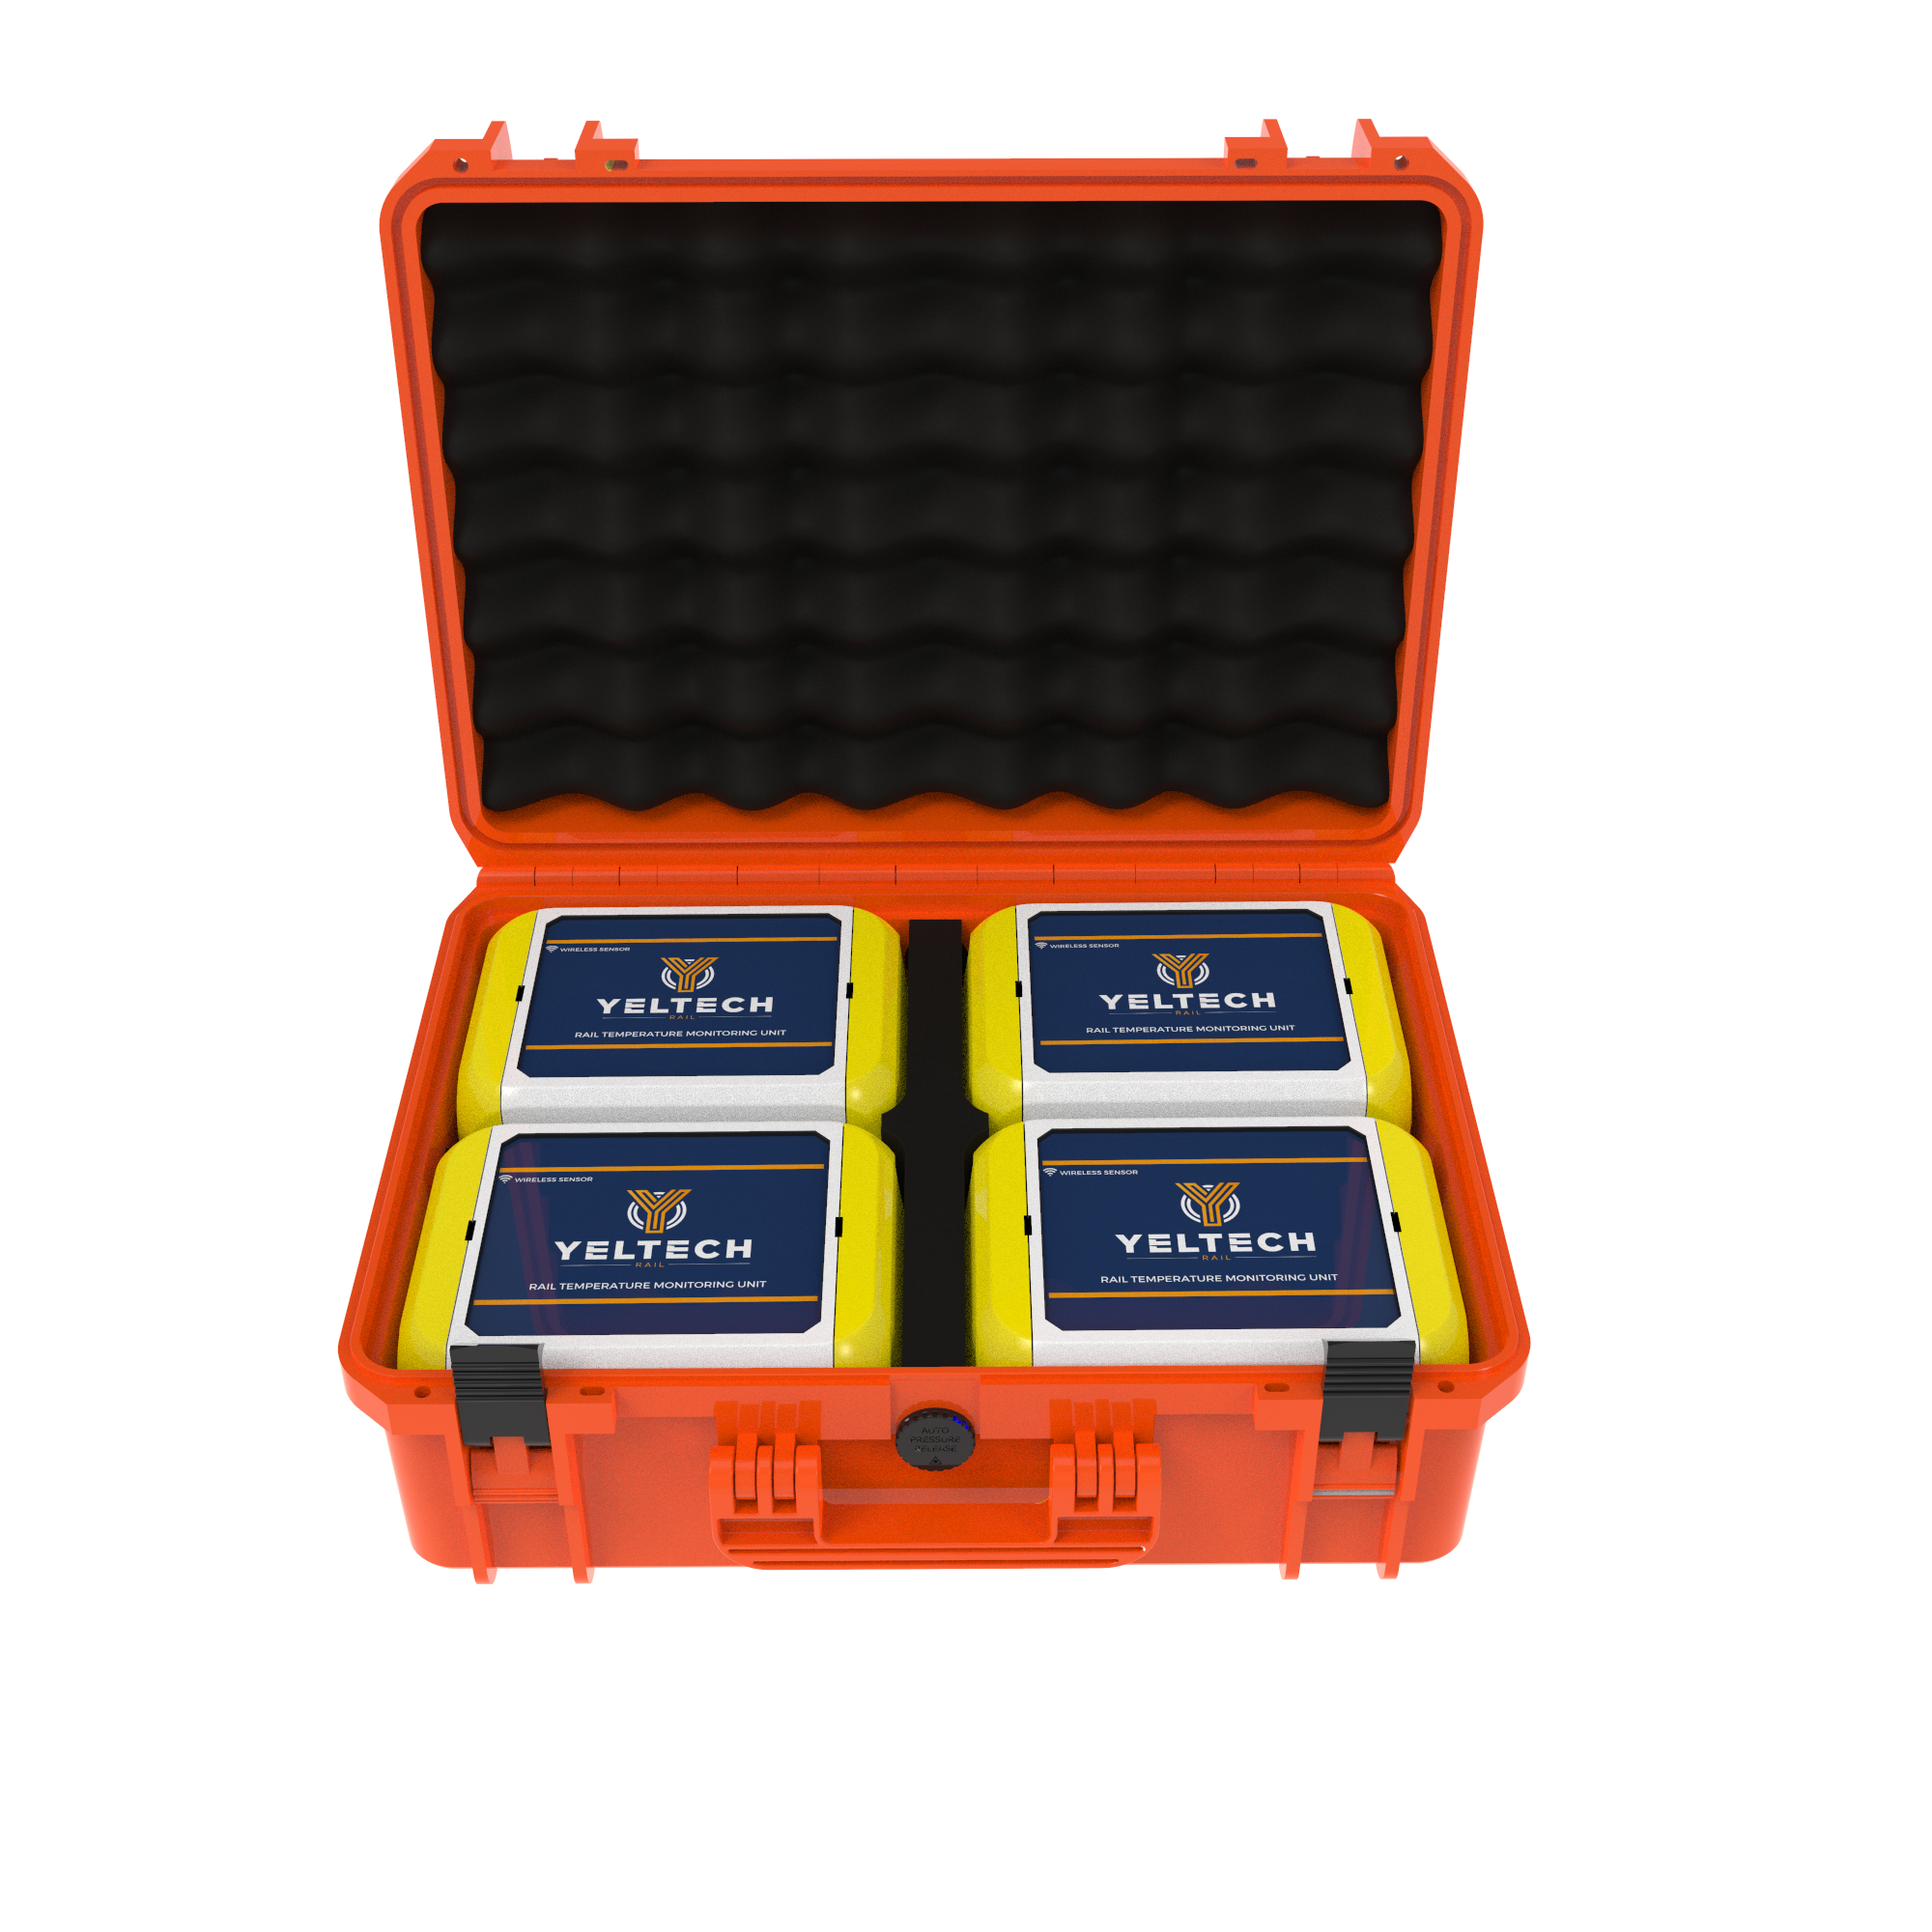 Transport Multiple Rail Temperature Monitors with our Carry Case